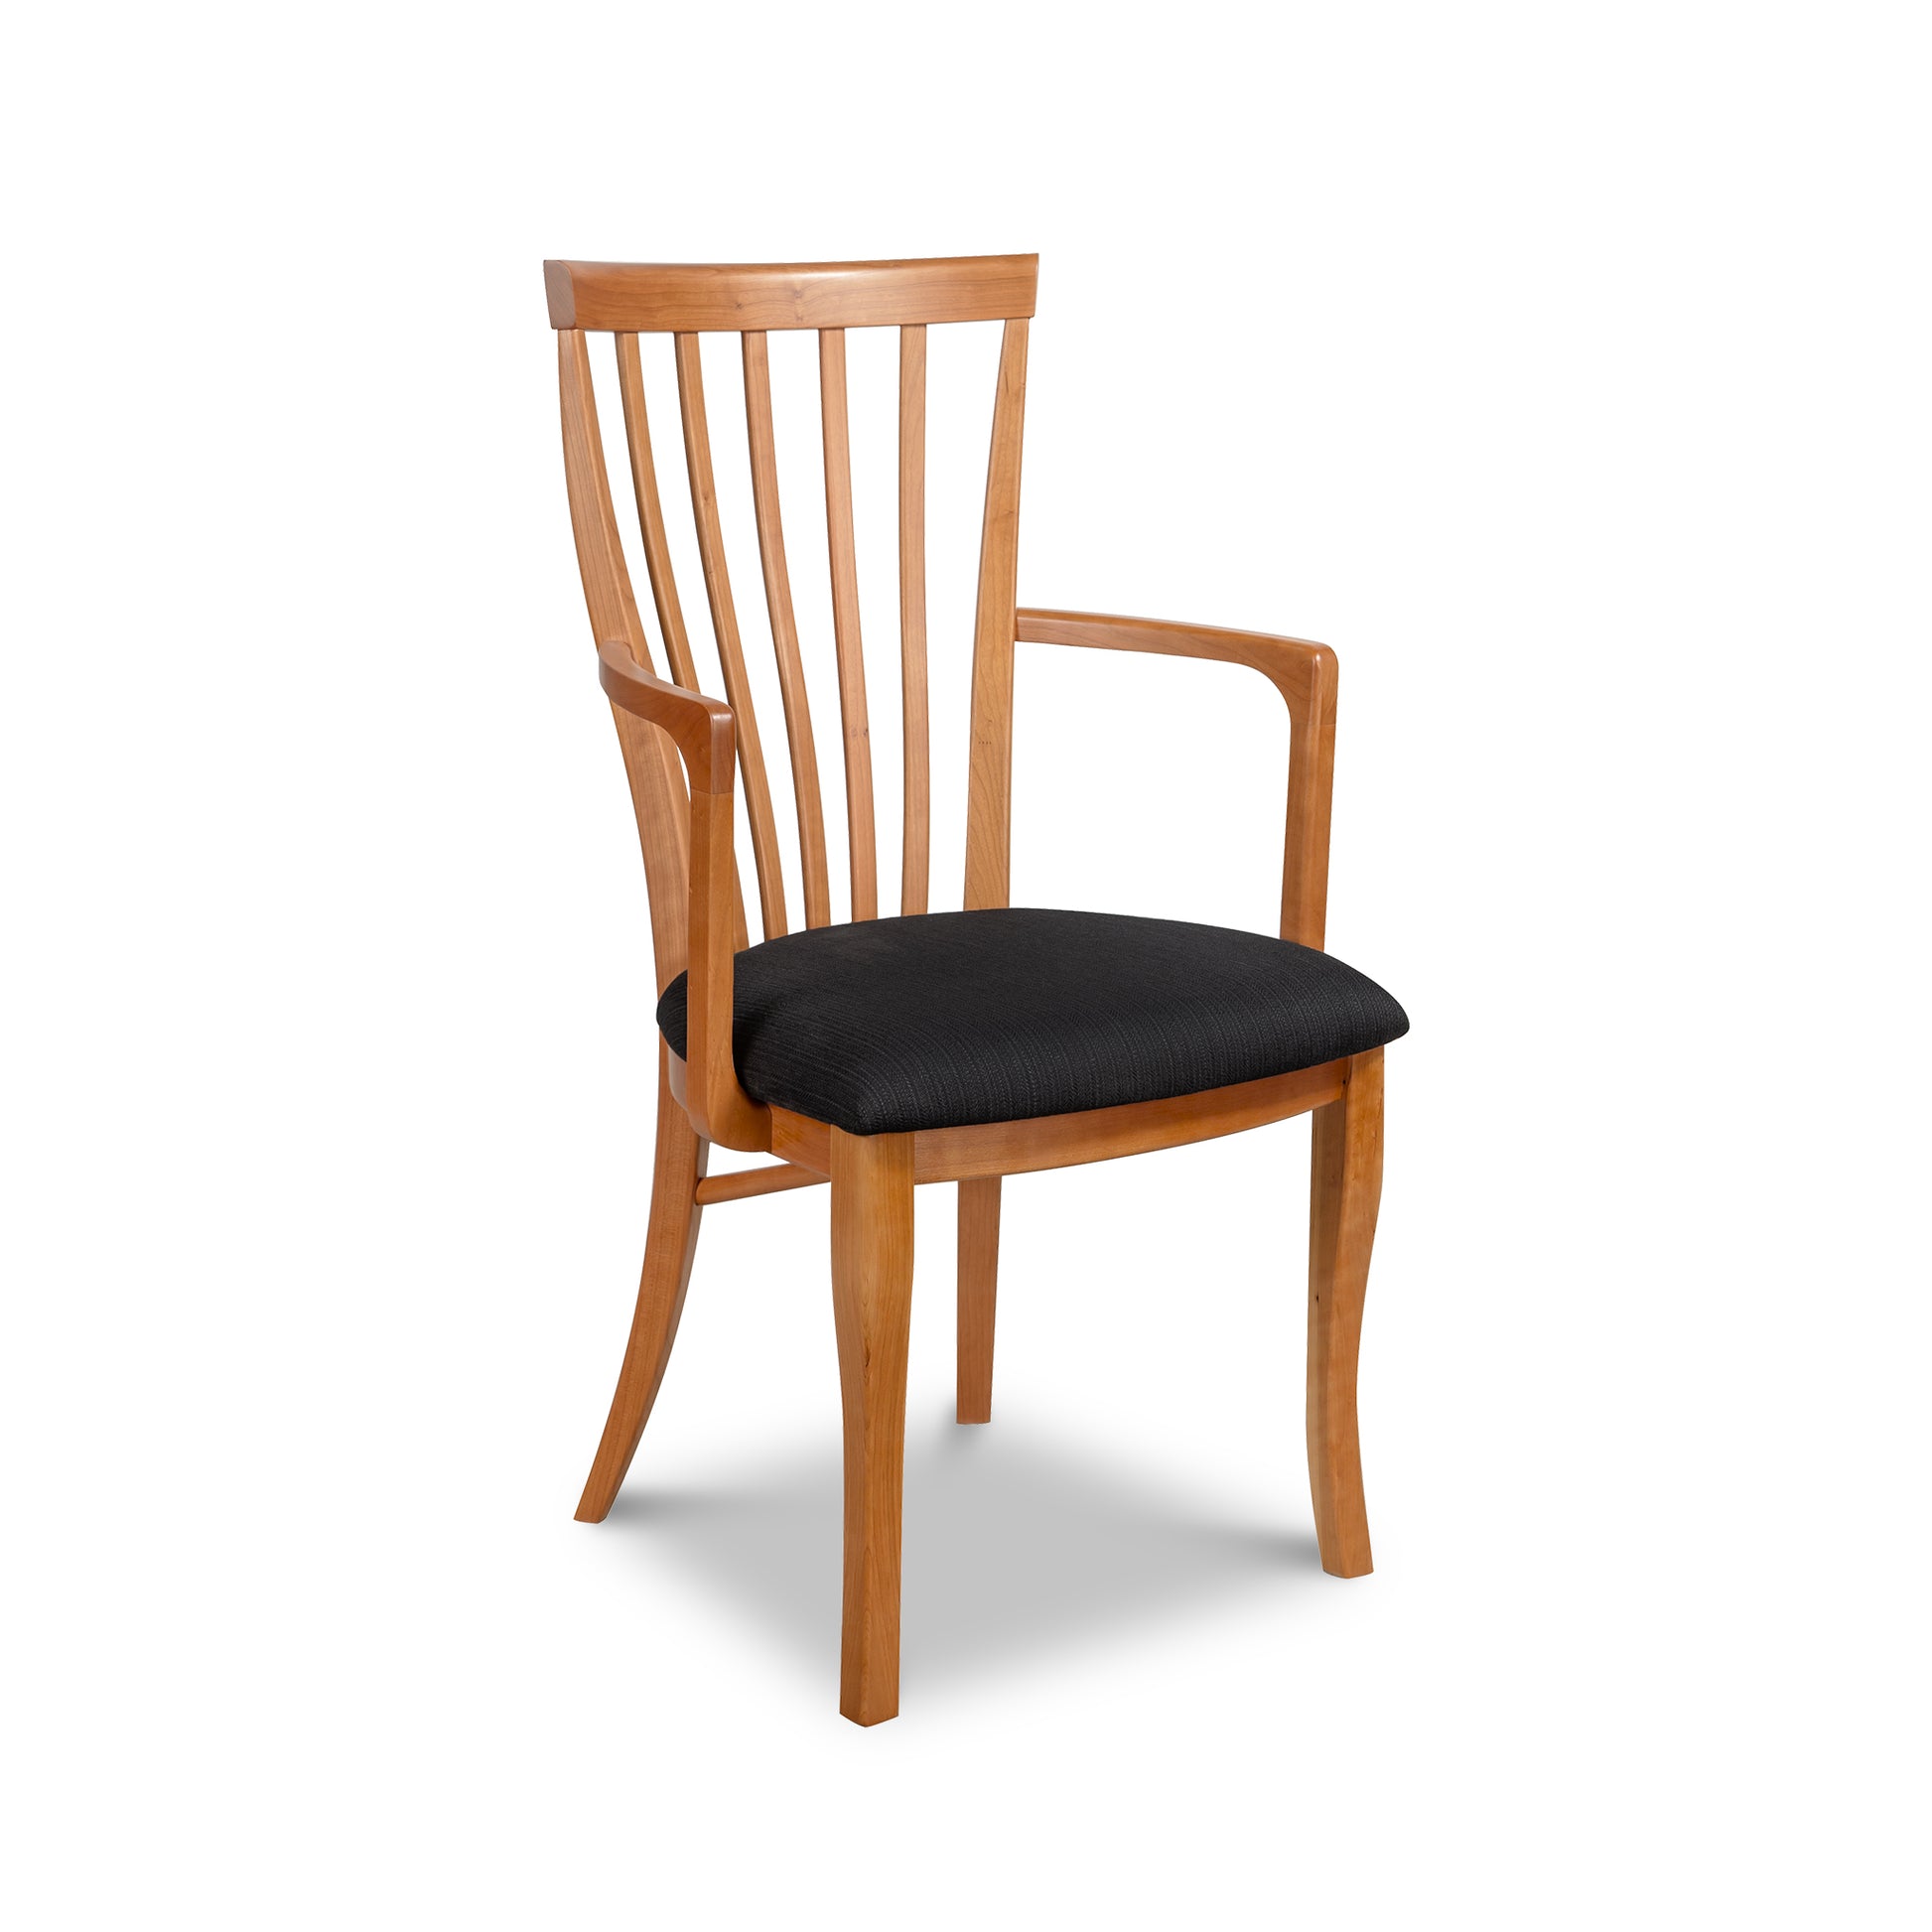 A Lyndon Furniture Classic Shaker Arm Chair #1 - Floor Model with natural wood construction and black upholstered seat.